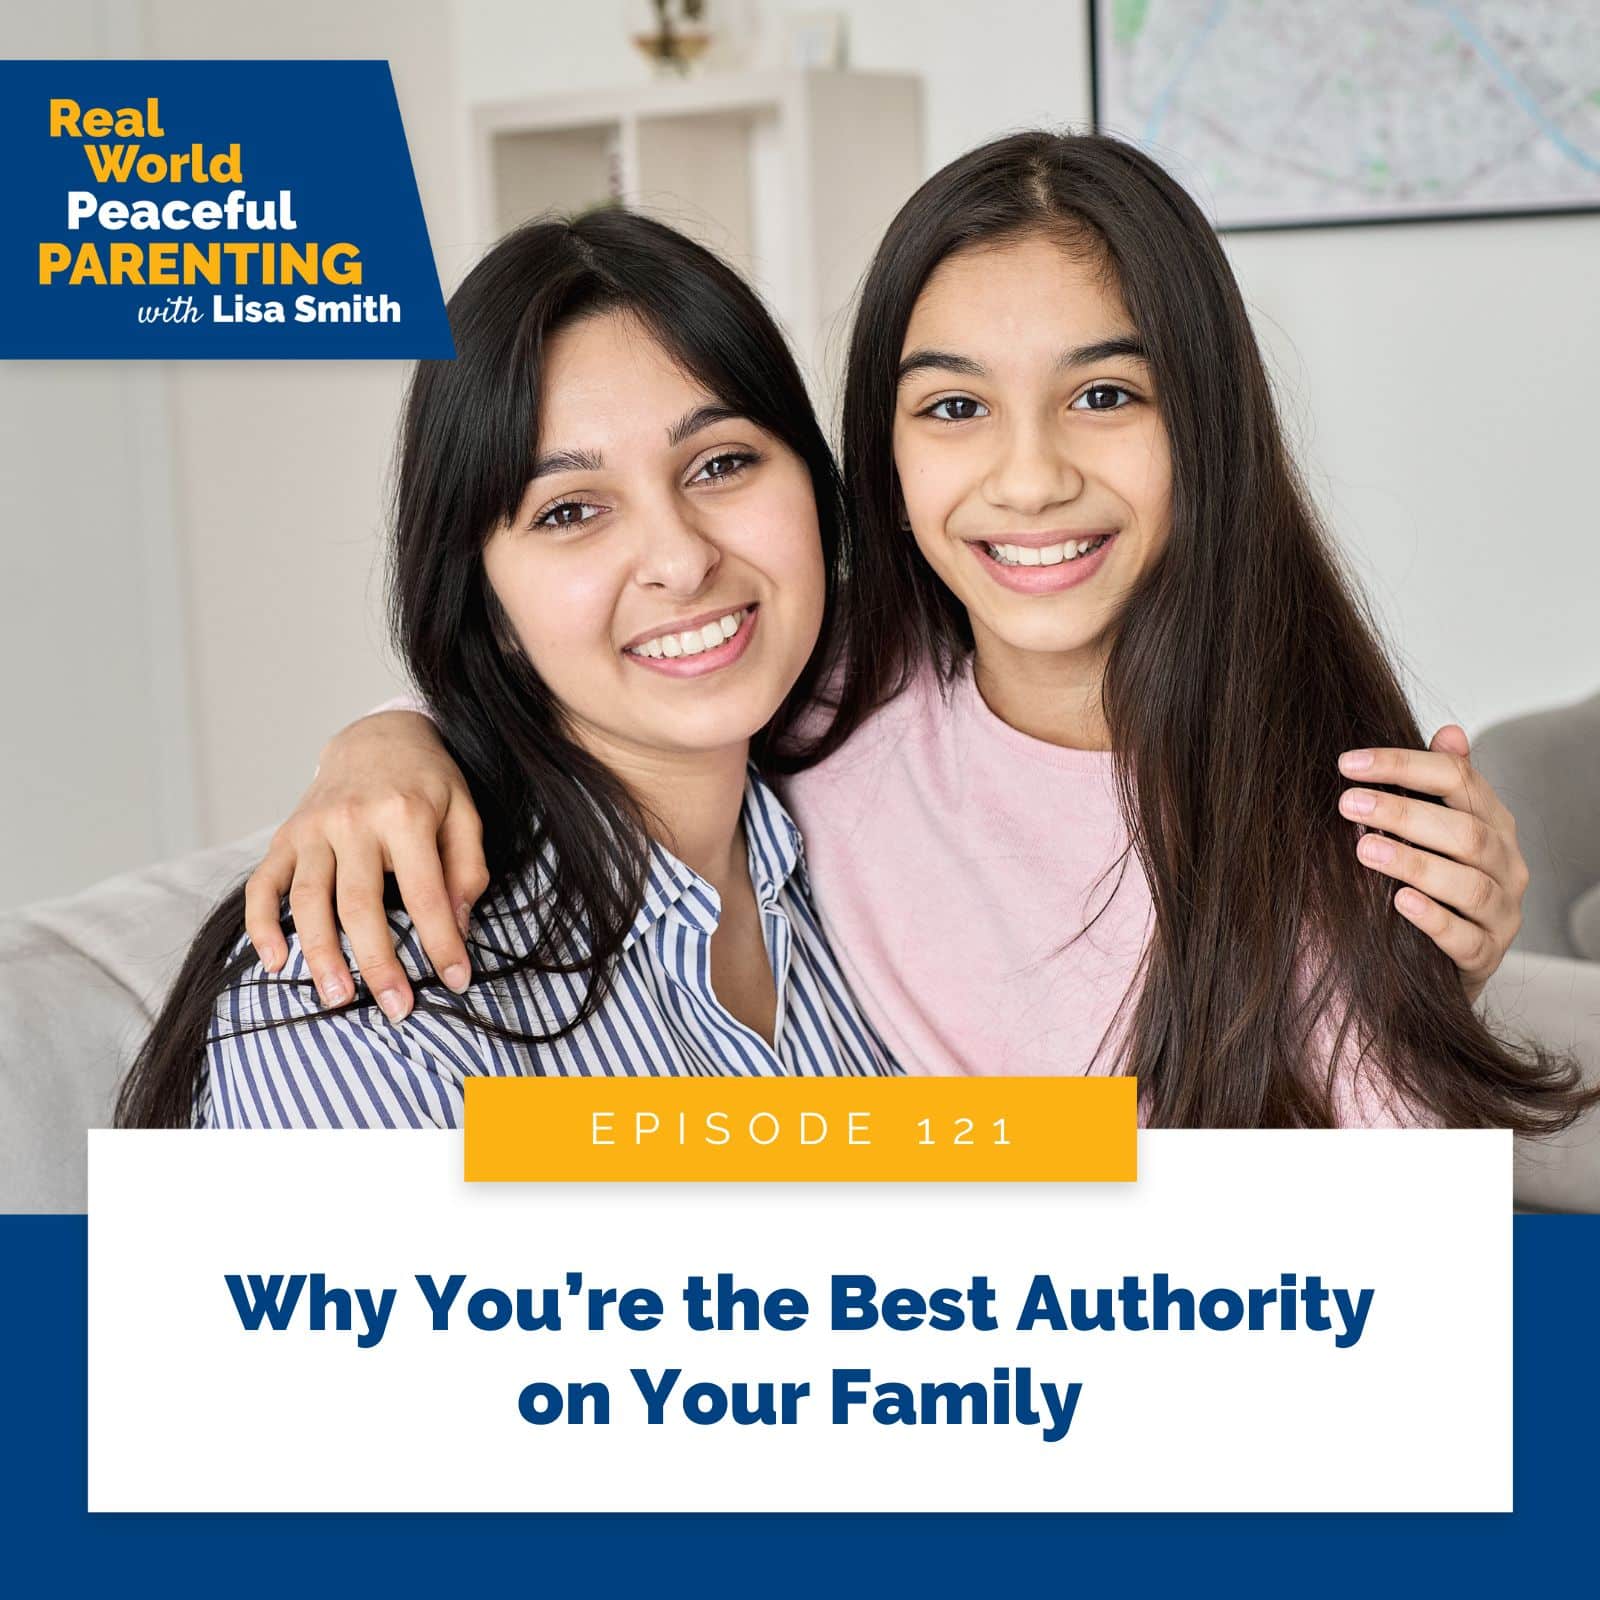 Real World Peaceful Parenting Lisa Smith | Why You’re the Best Authority on Your Family